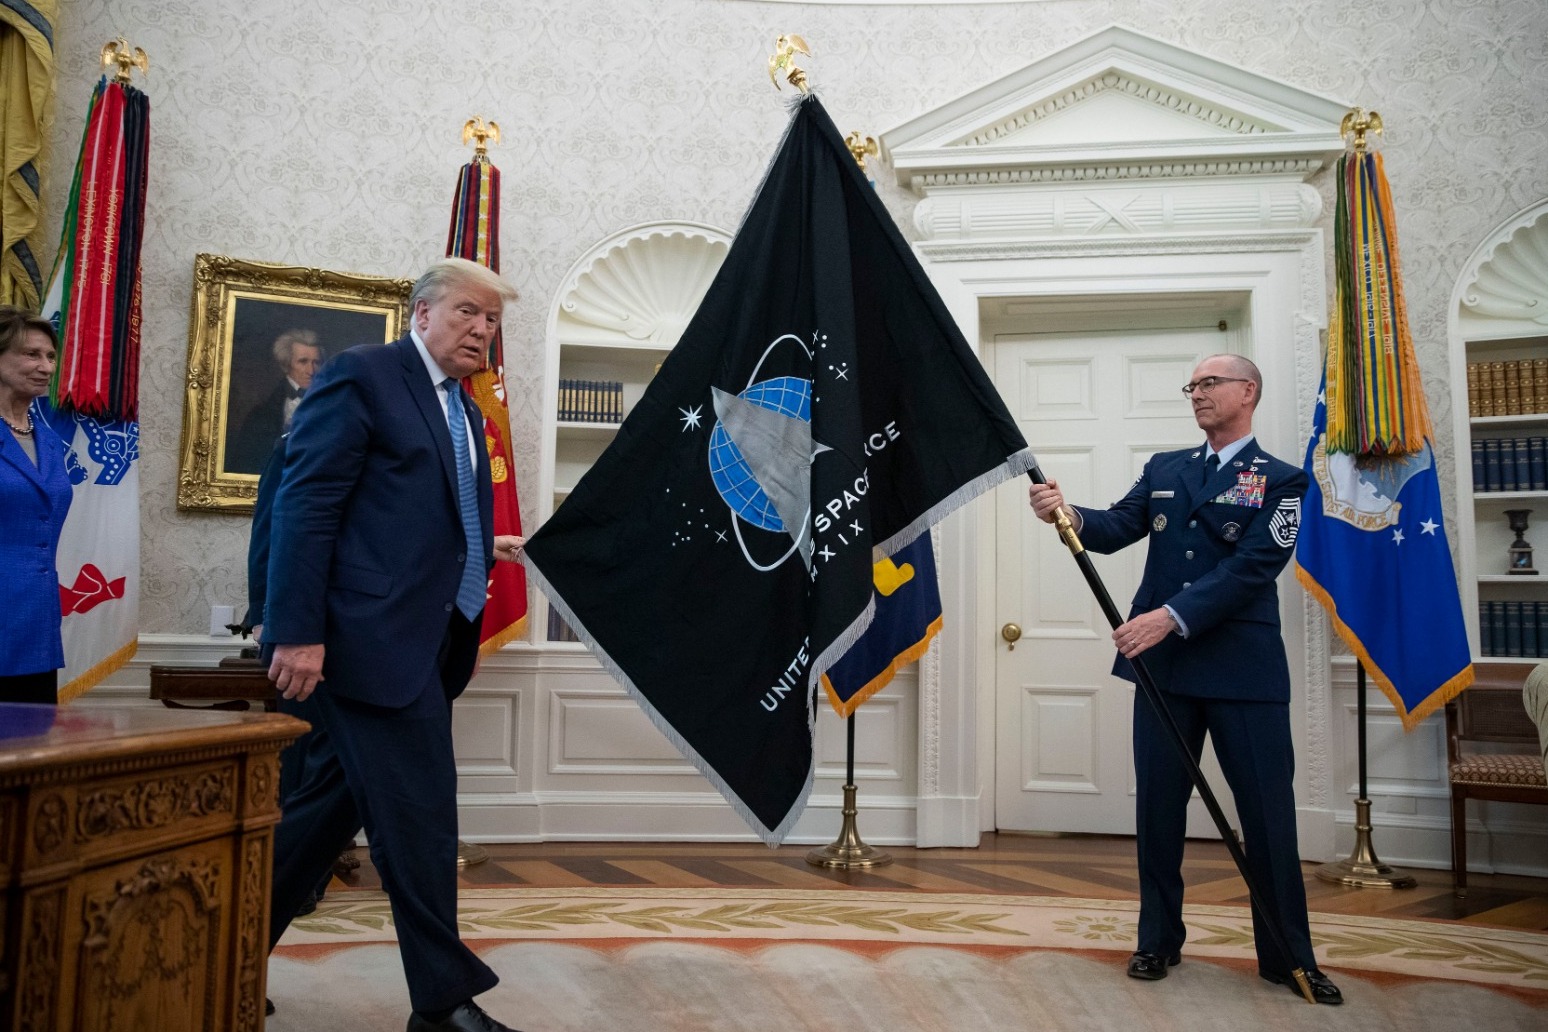 US Space Force flag presented to Trump 